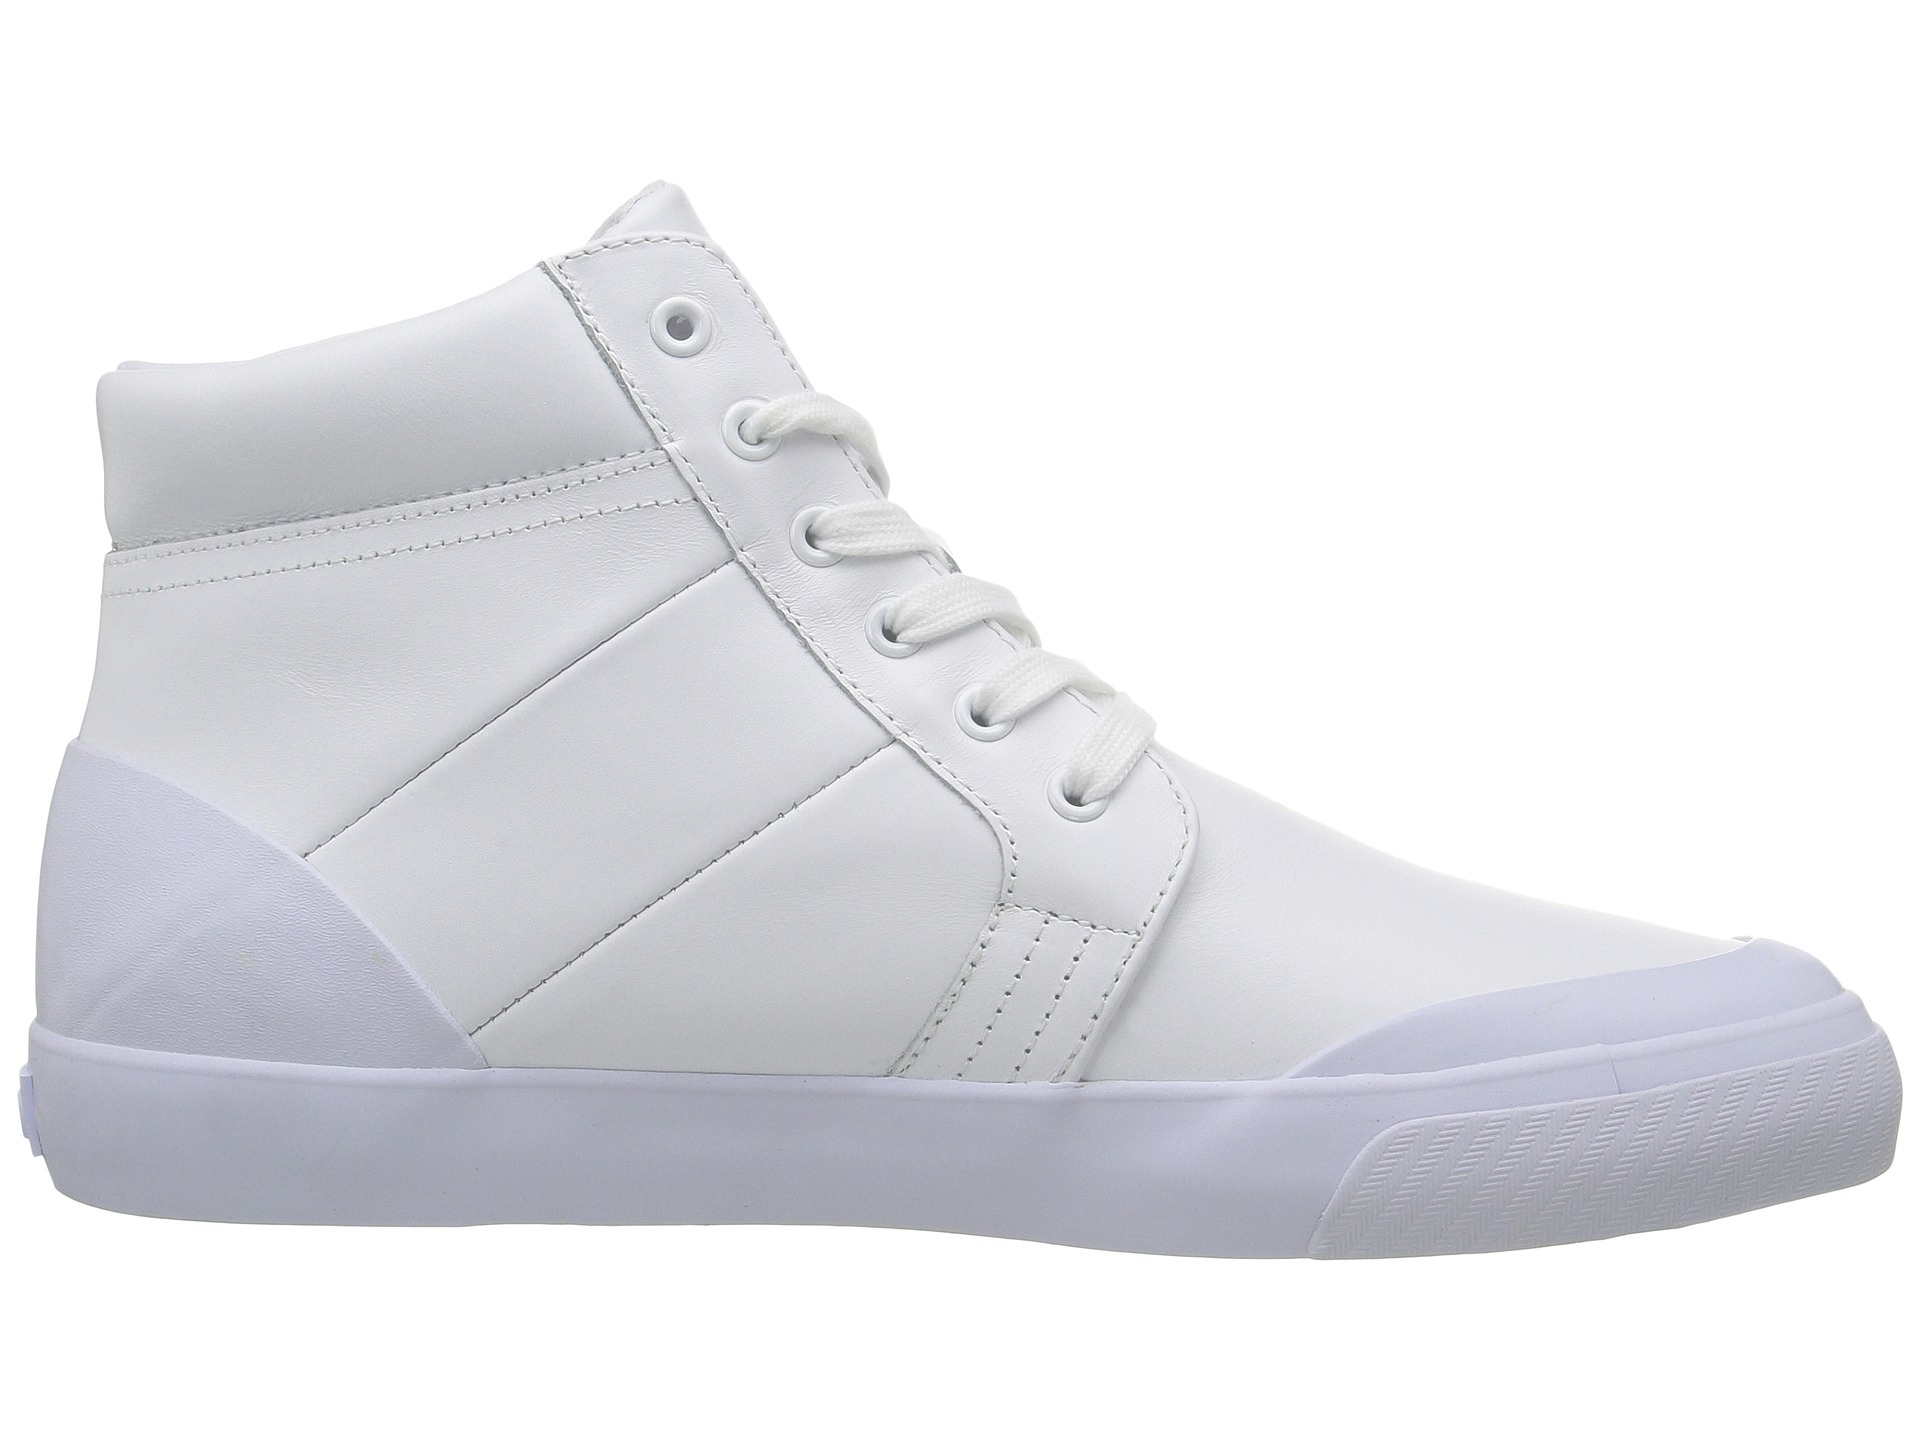 Polo Ralph Lauren Isaak White Smooth Sport Leather - Zappos.com Free ...